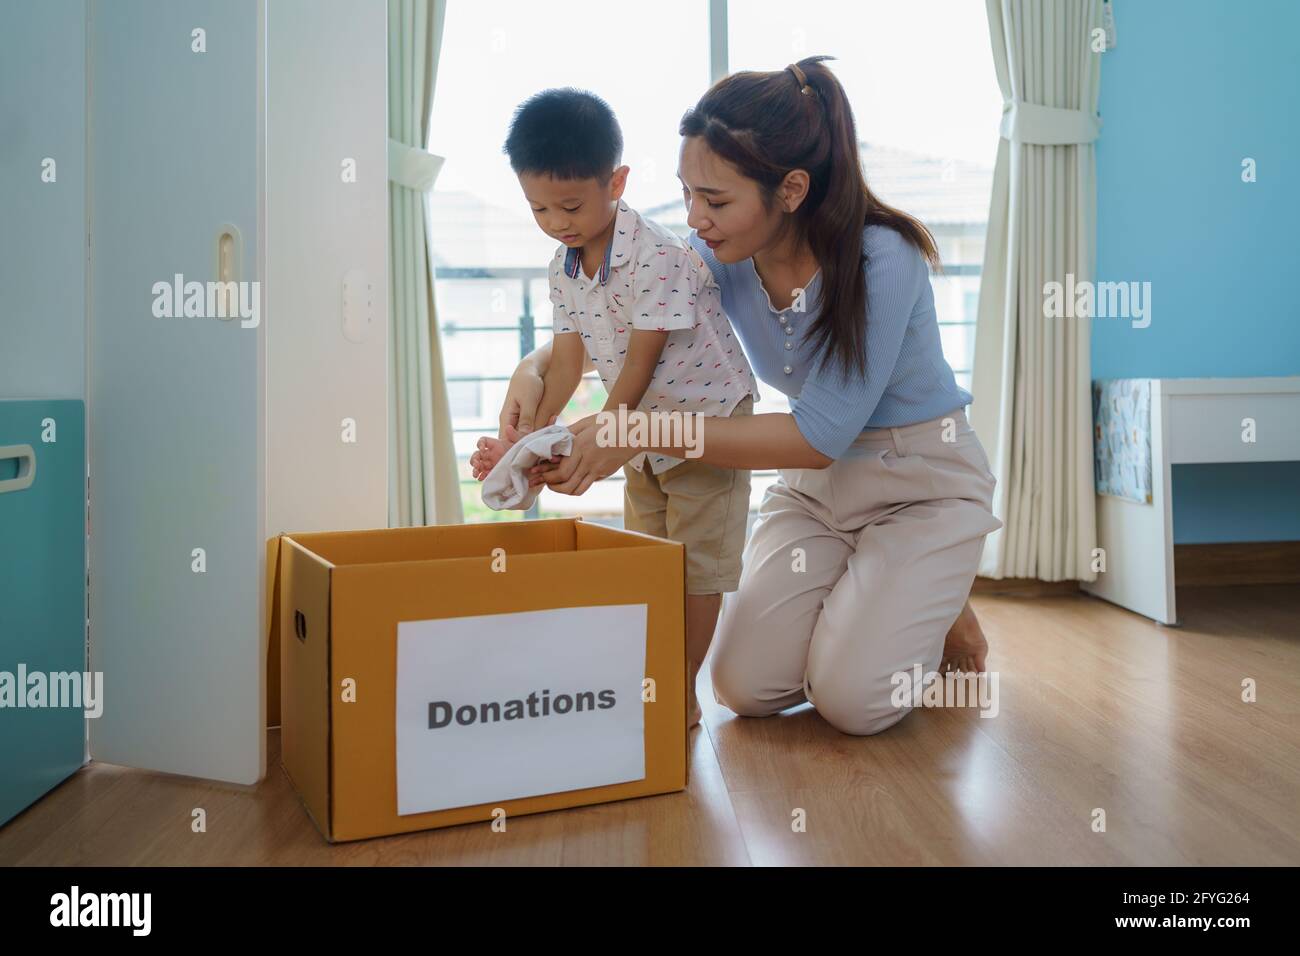 Asian mother and son are standing near closet of clothes in the dressing room carrying a box of clothes donated to take to the donation center. Stock Photo